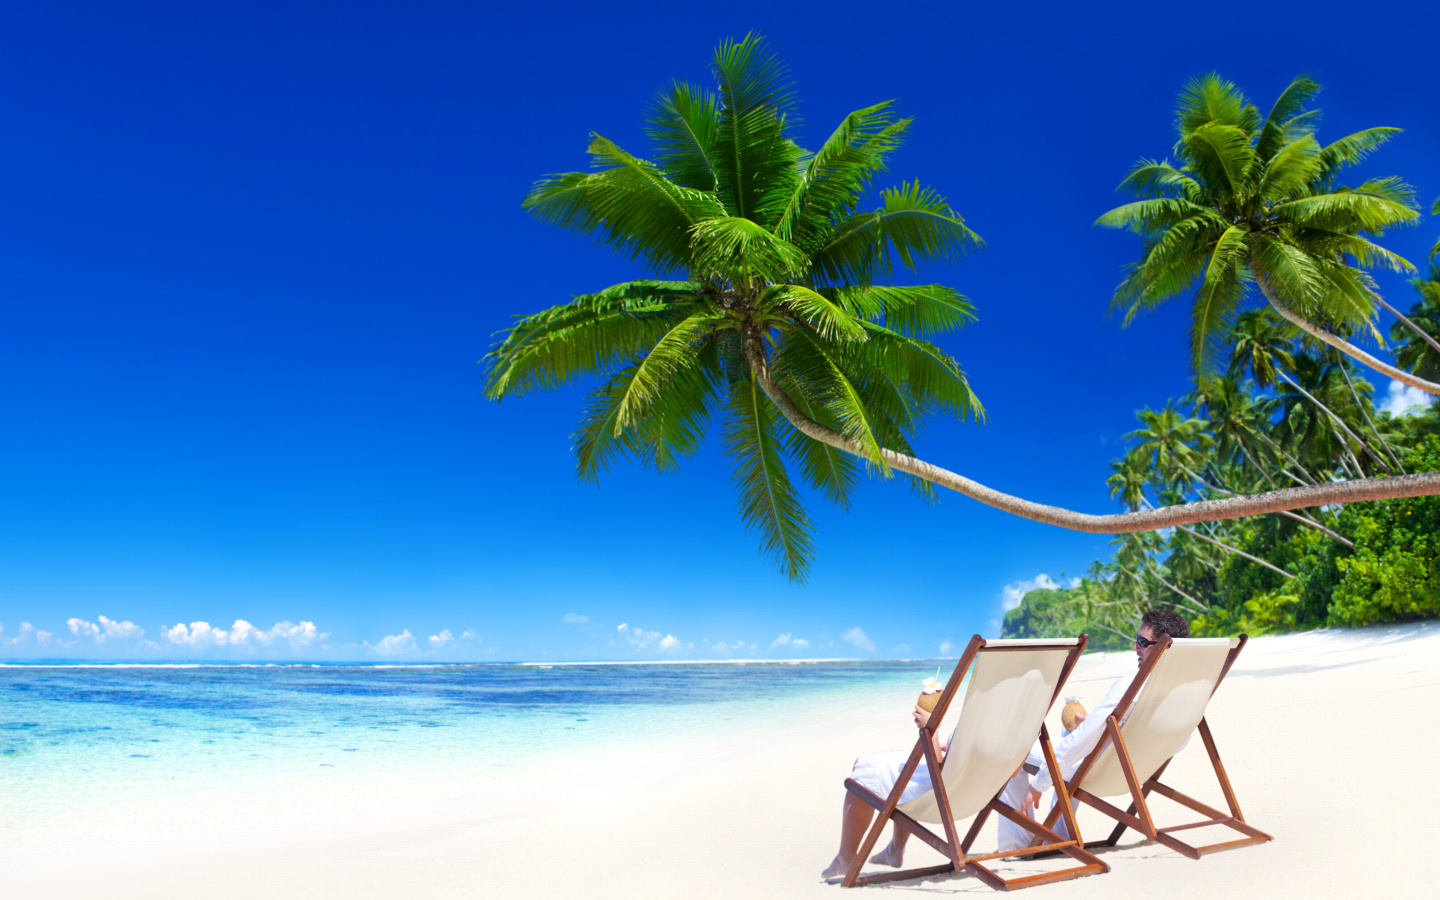 Vacation in Tropical Paradise wallpaper 1440x900